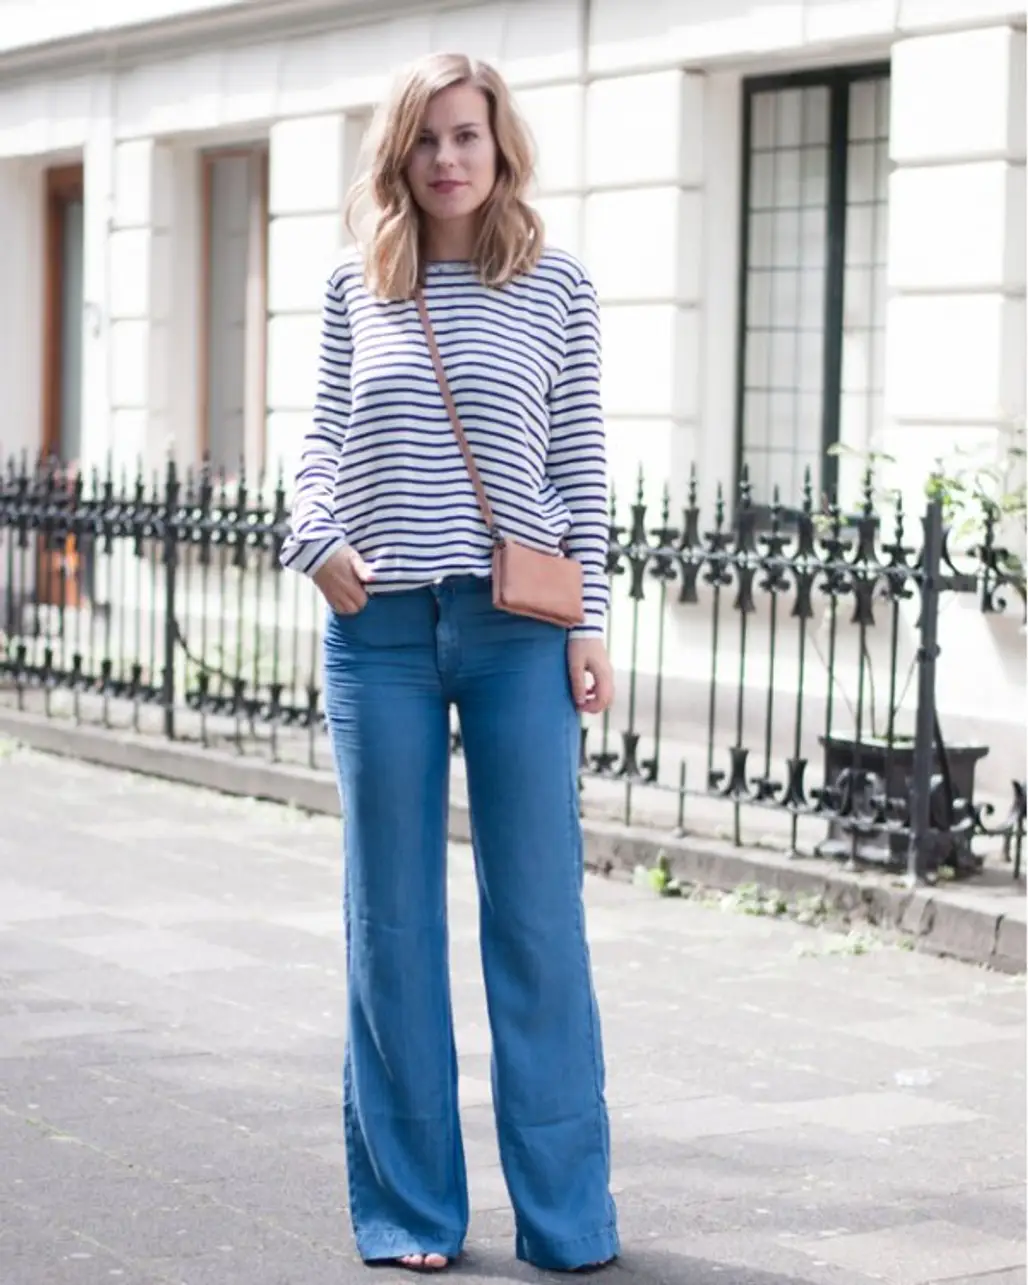 Work a Classic Everyday Look with a Striped Top and Flared Jeans